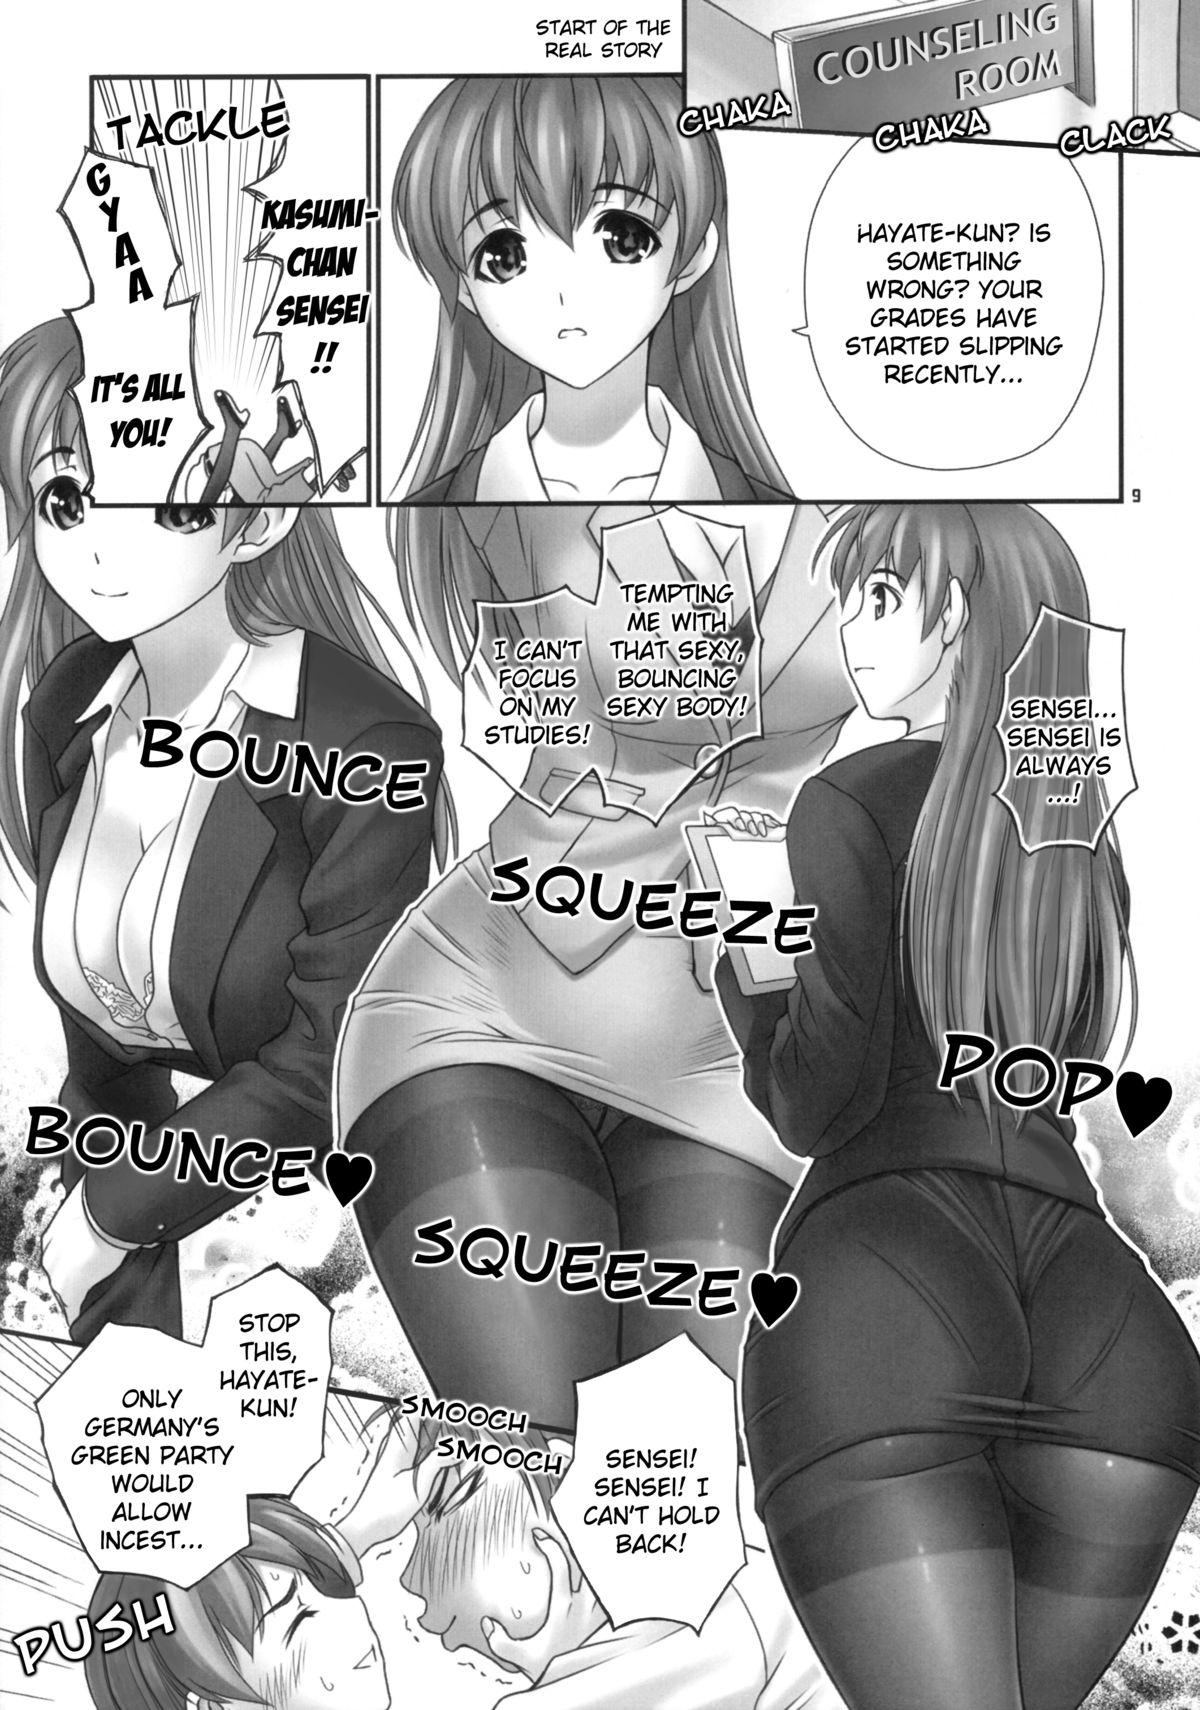 Analfuck St. Dead or Alive Highschool - Love Love Kasumi Chan Teacher - Dead or alive Skinny - Page 8